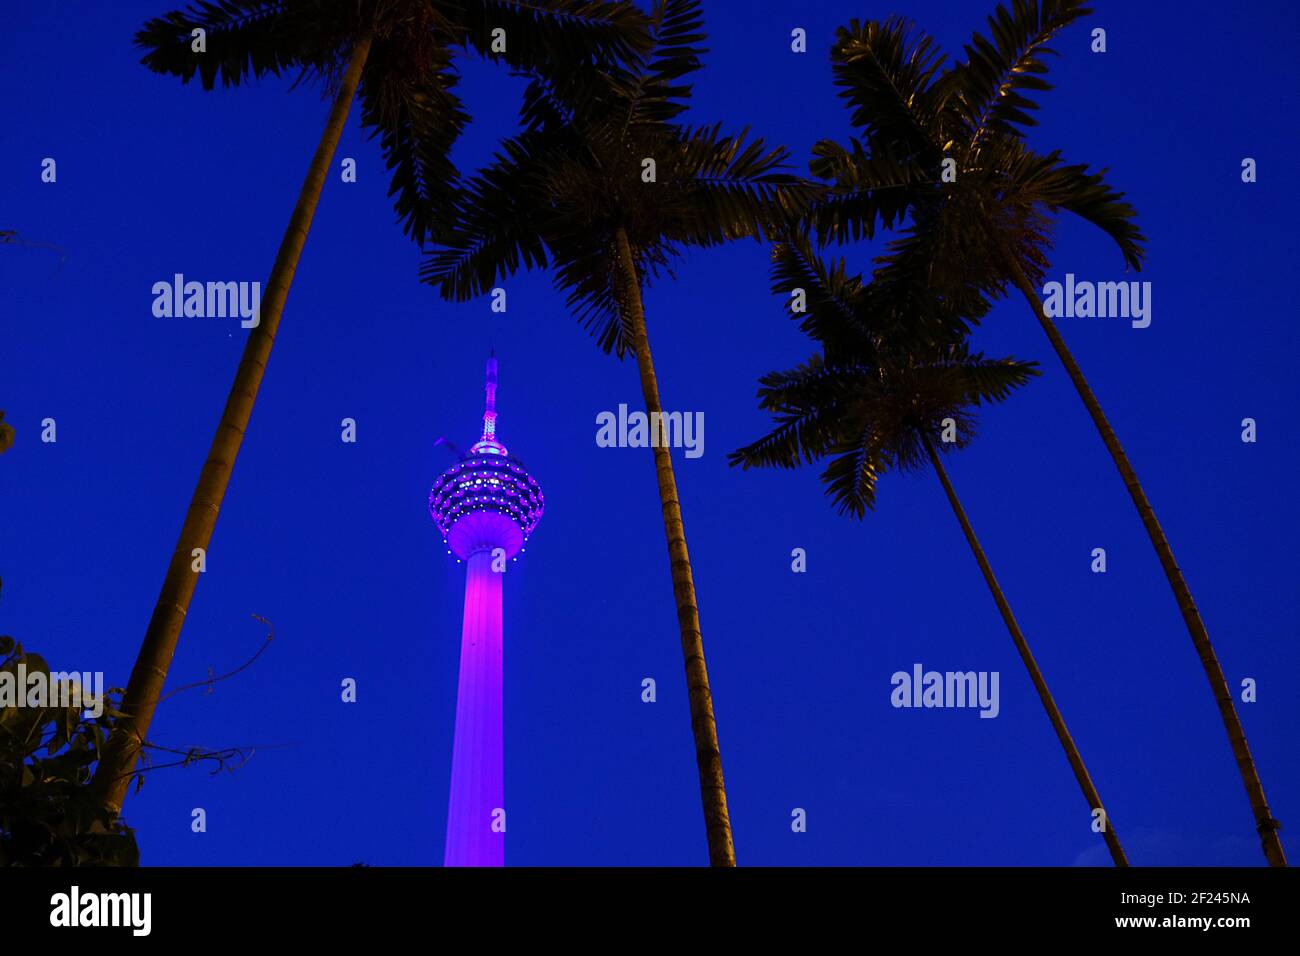 KL Tower At Night: The Kuala Lumpur Tower illuminated in purple light with palm trees Stock Photo